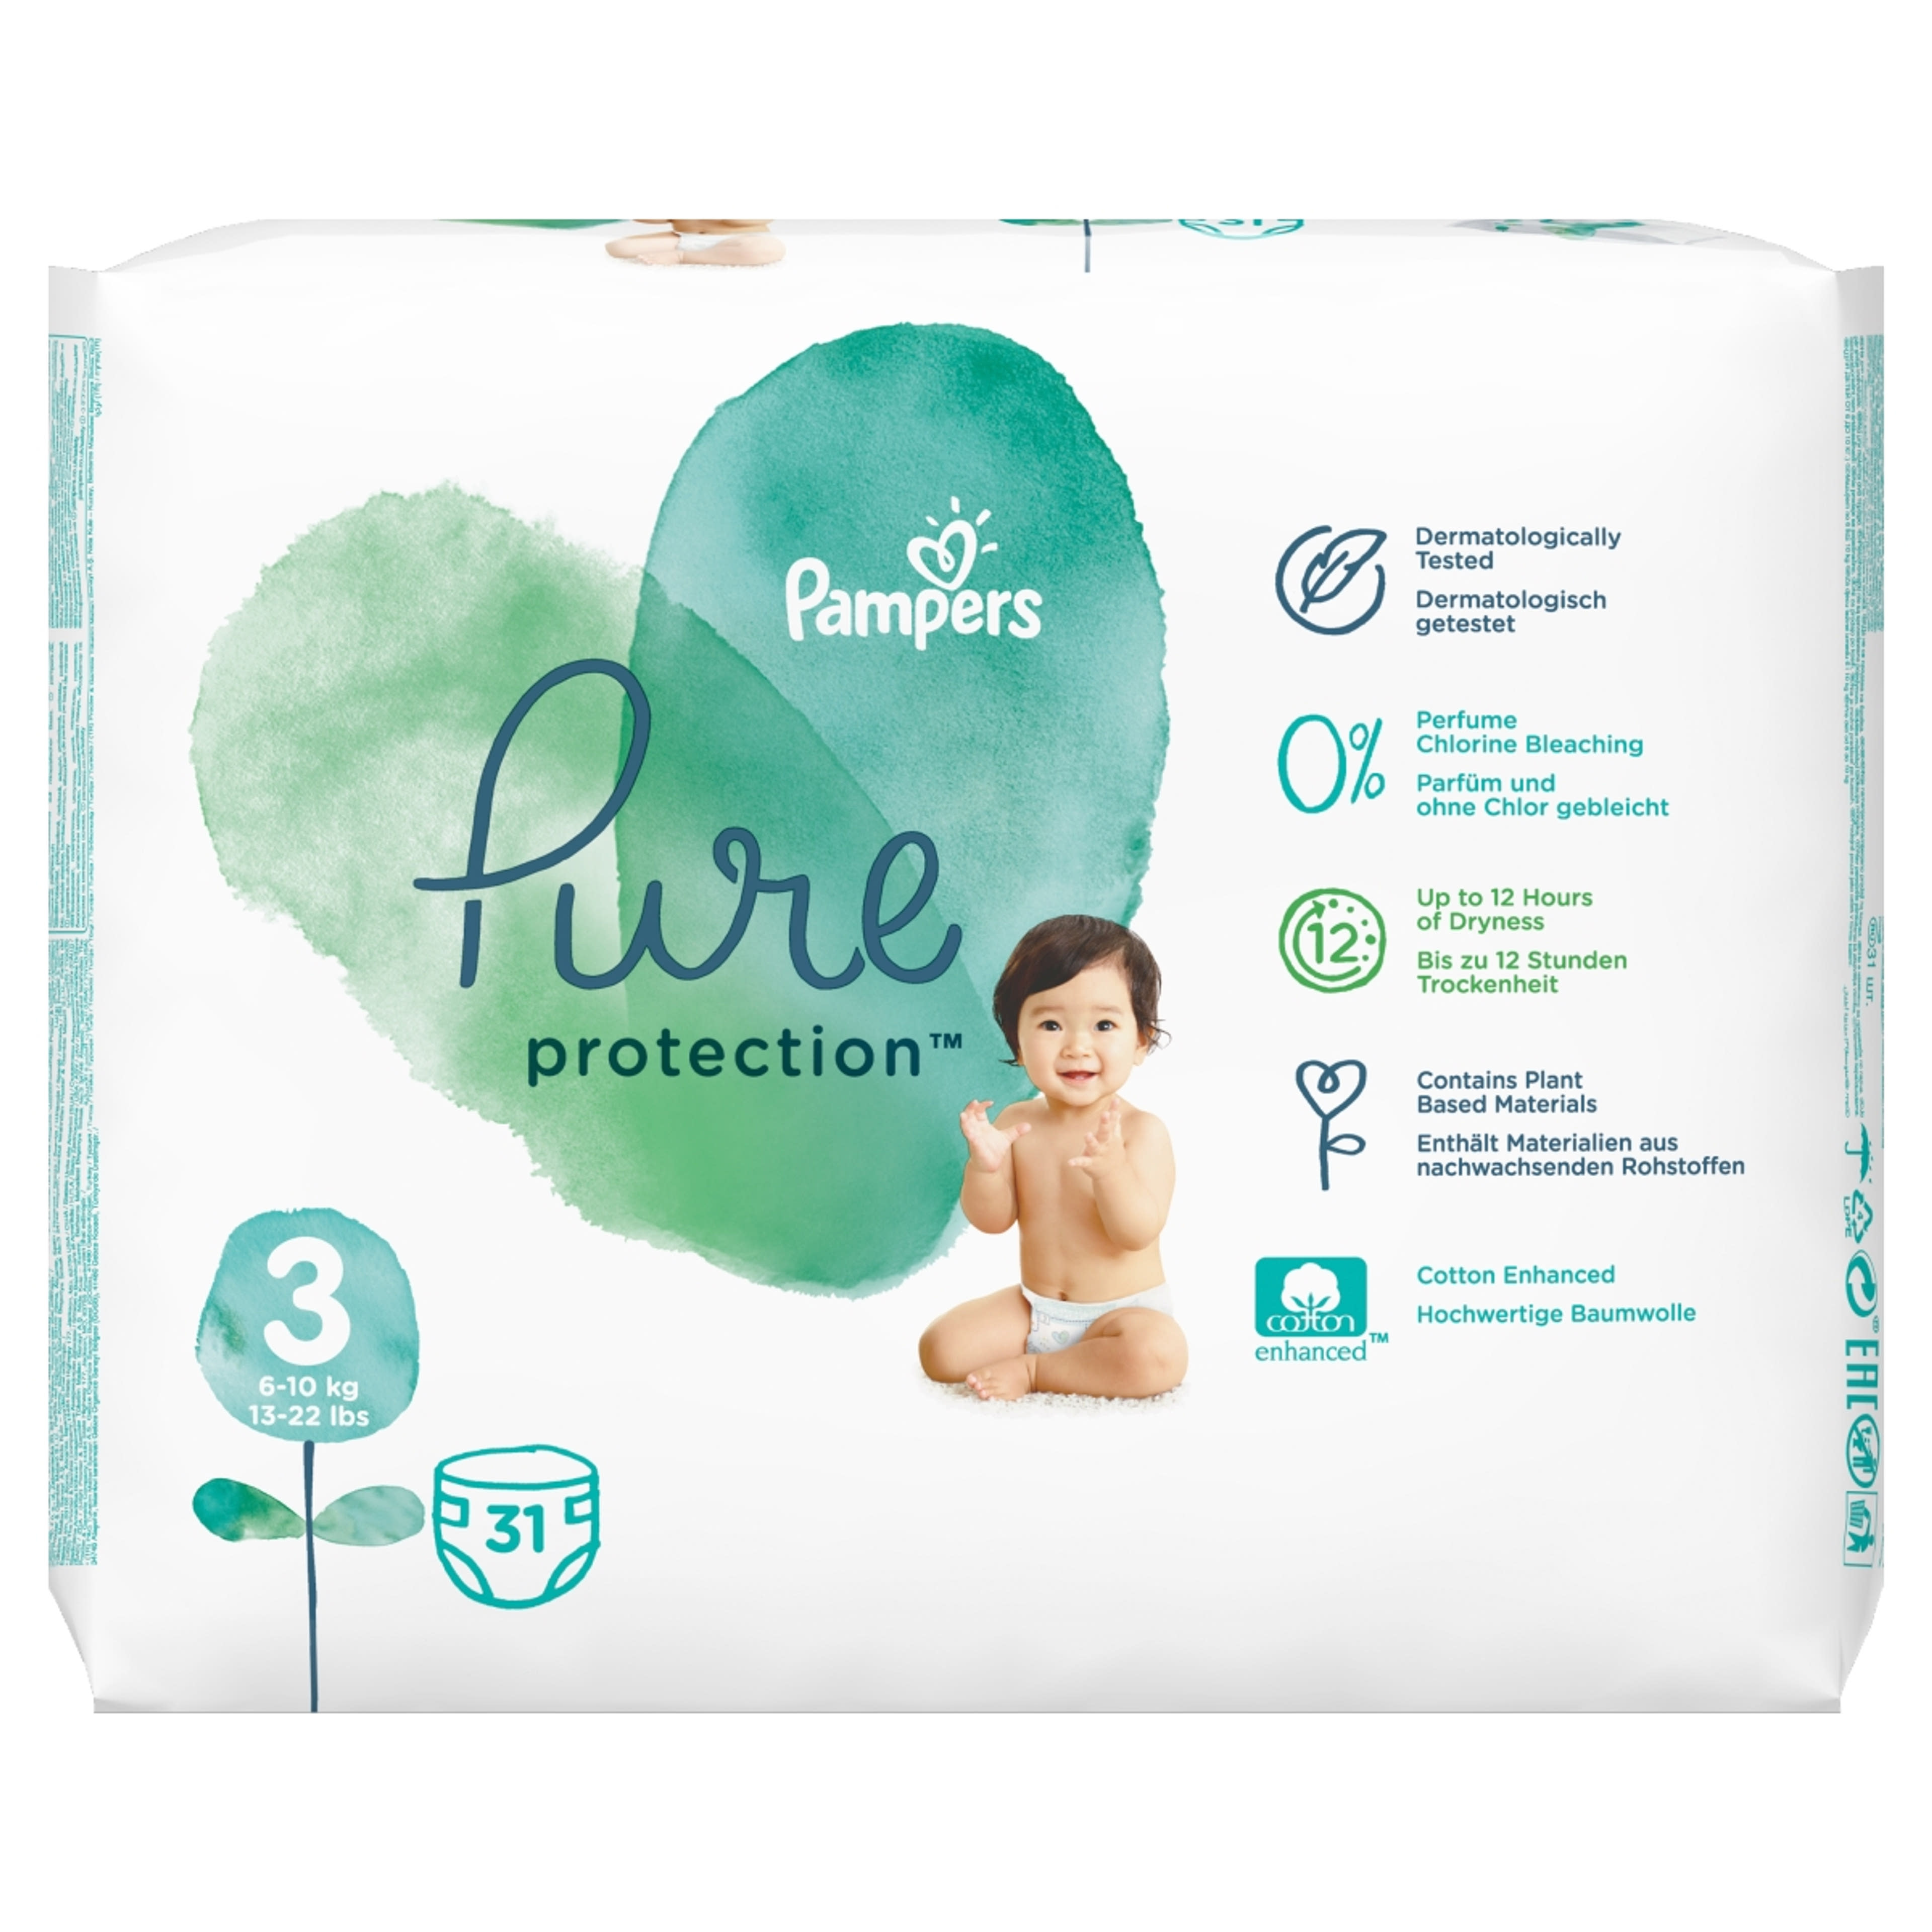 Pampers Pure ProtectionPelenka 3-as 6-10kg - 31 db-2